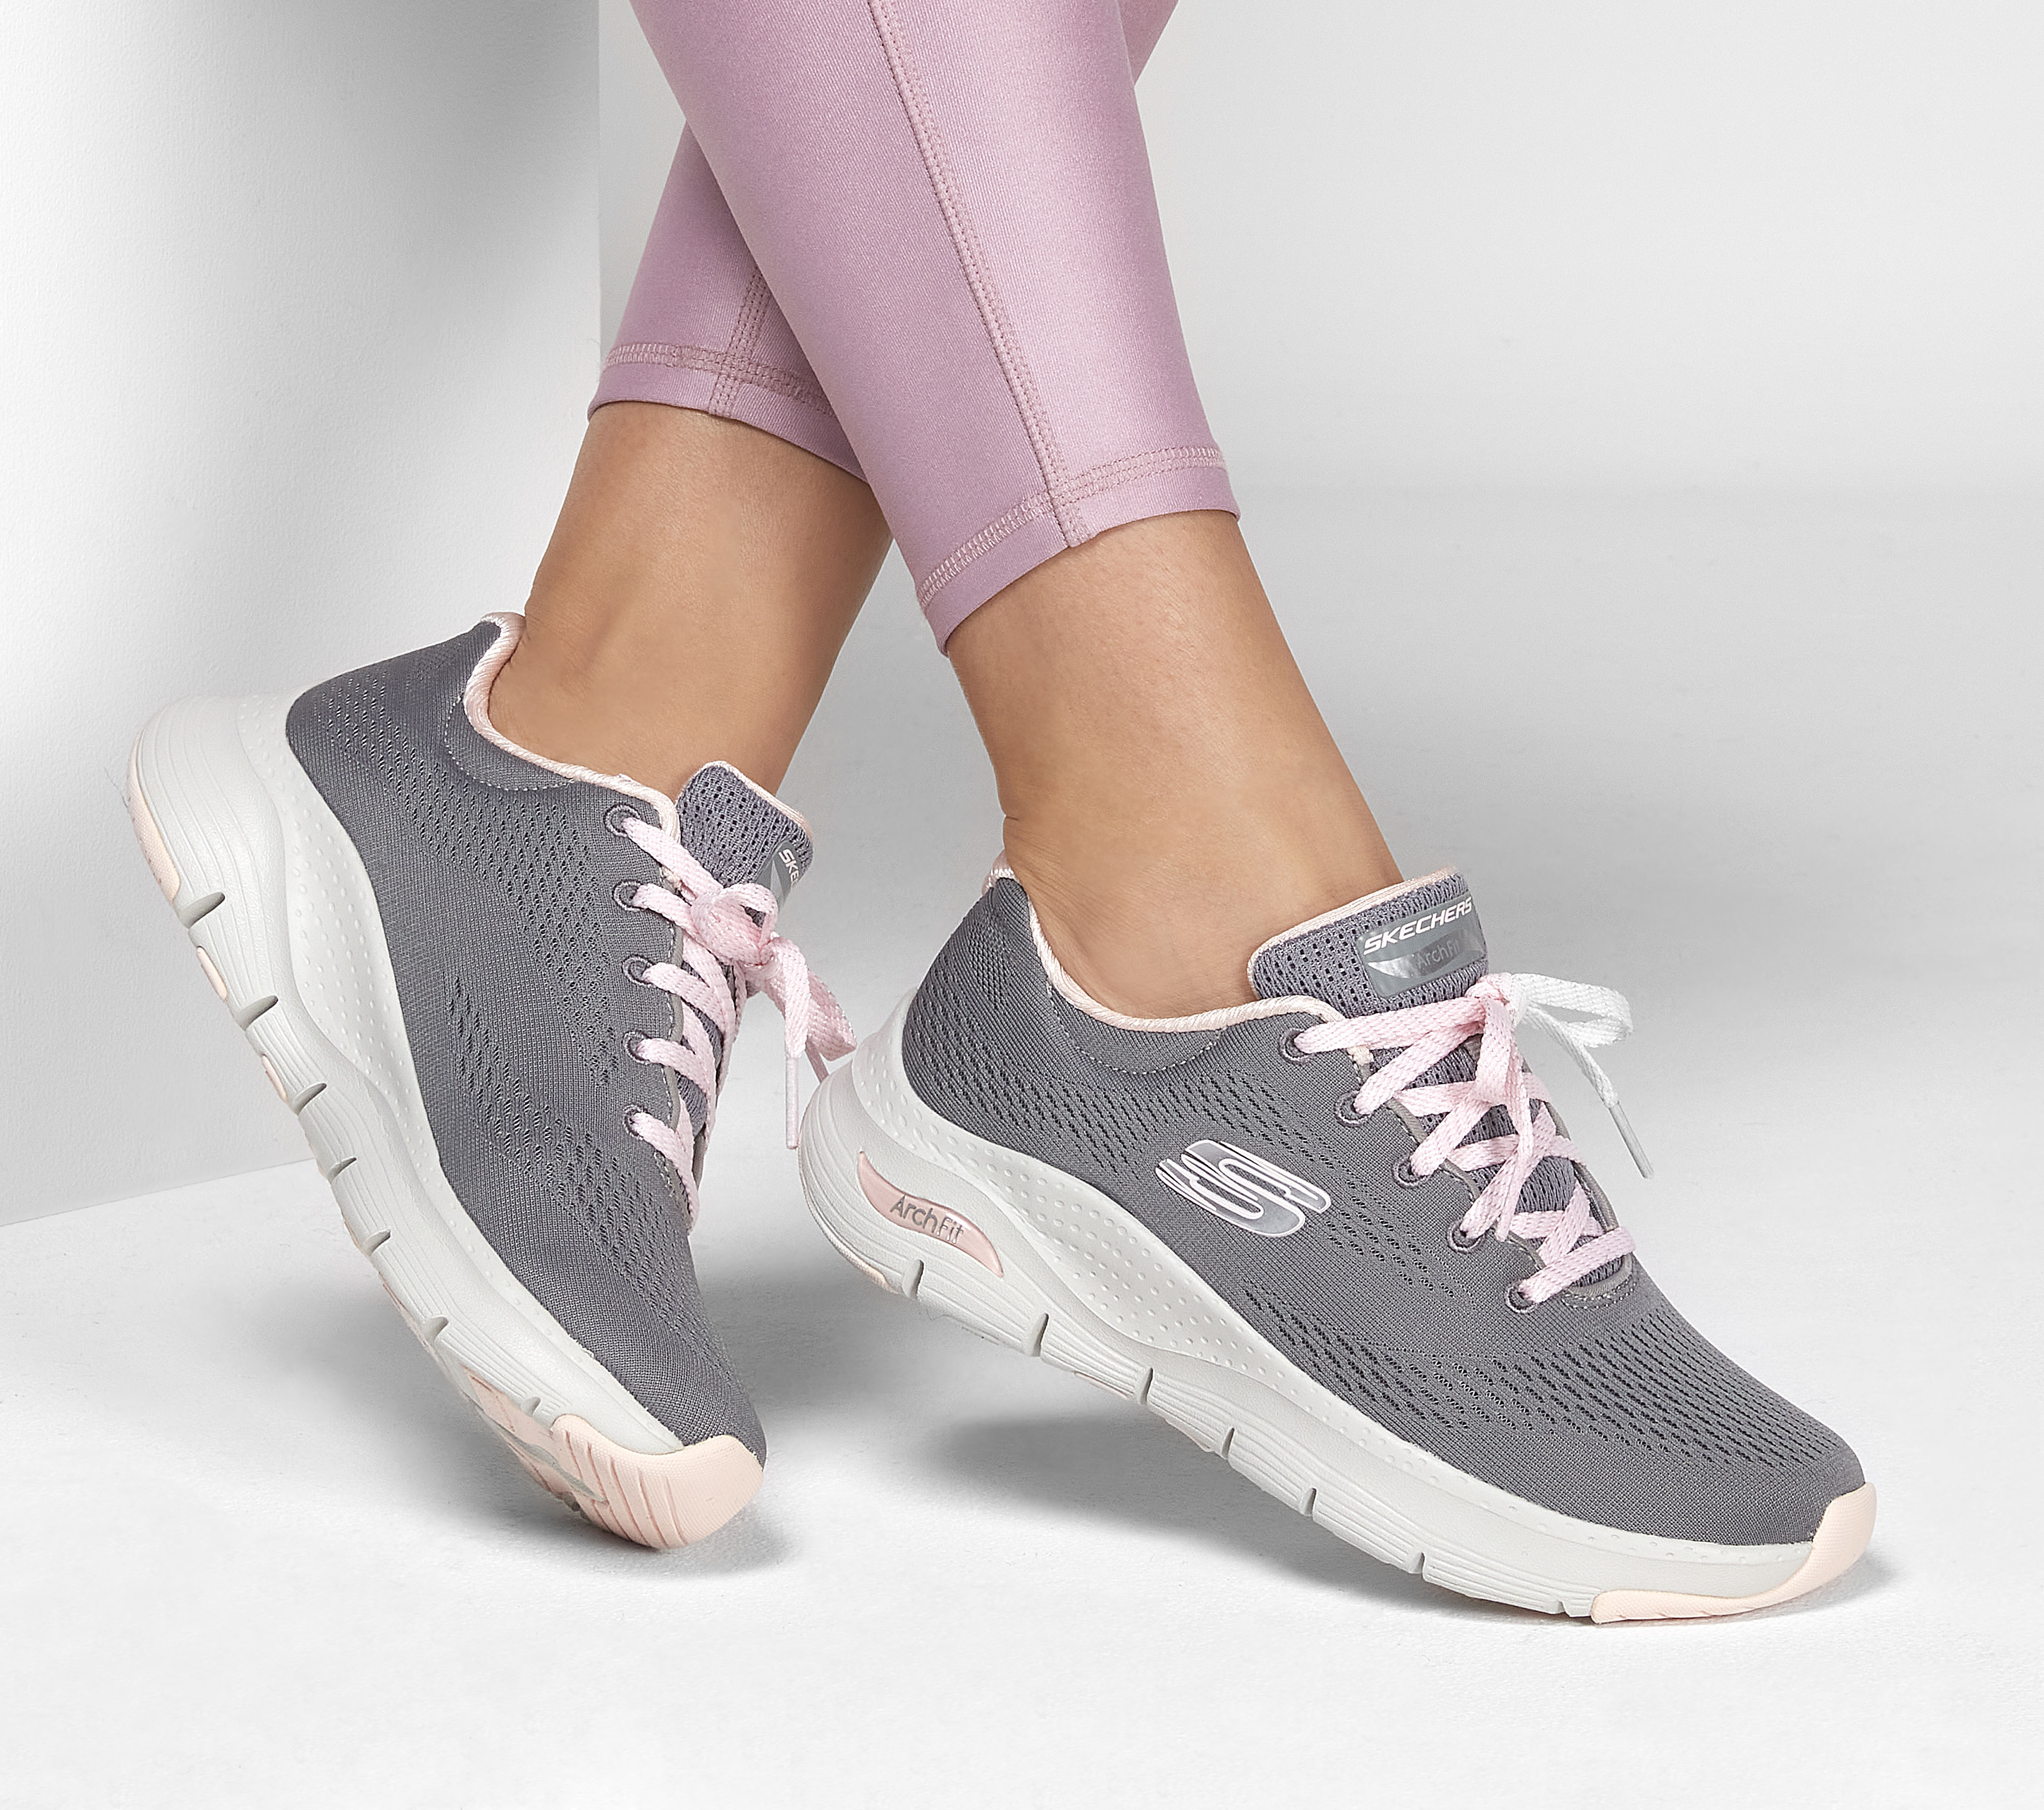 Shop the Skechers Arch Fit - Big Appeal 